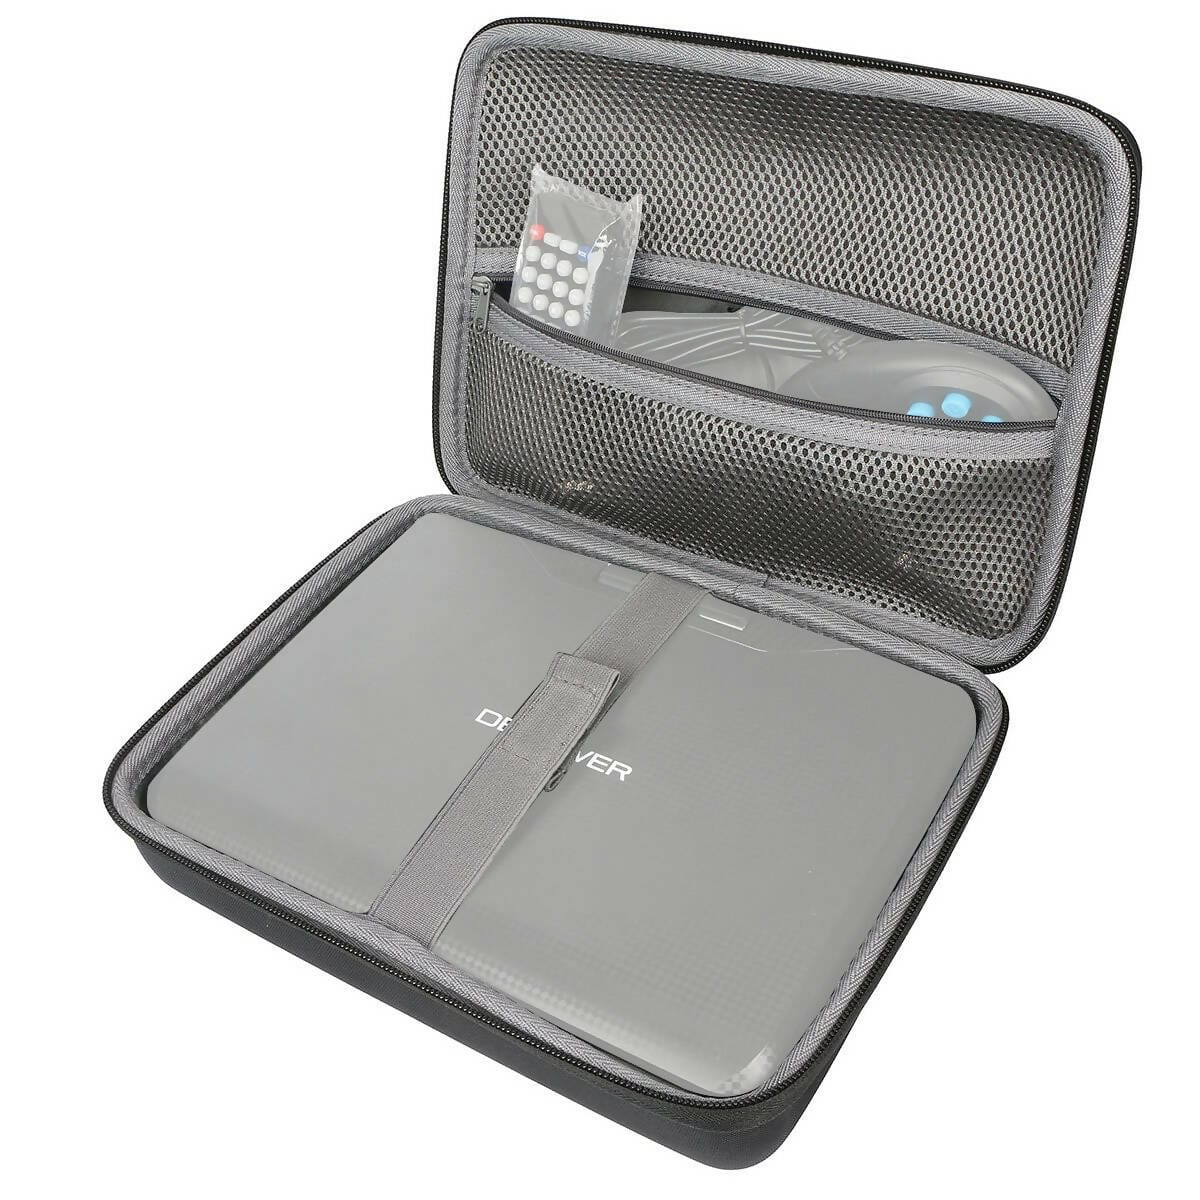 Provideolb DVD Cases Digicase Hard Carrying Case 7" for Portable DVD Player, TV, External USB - CP7078